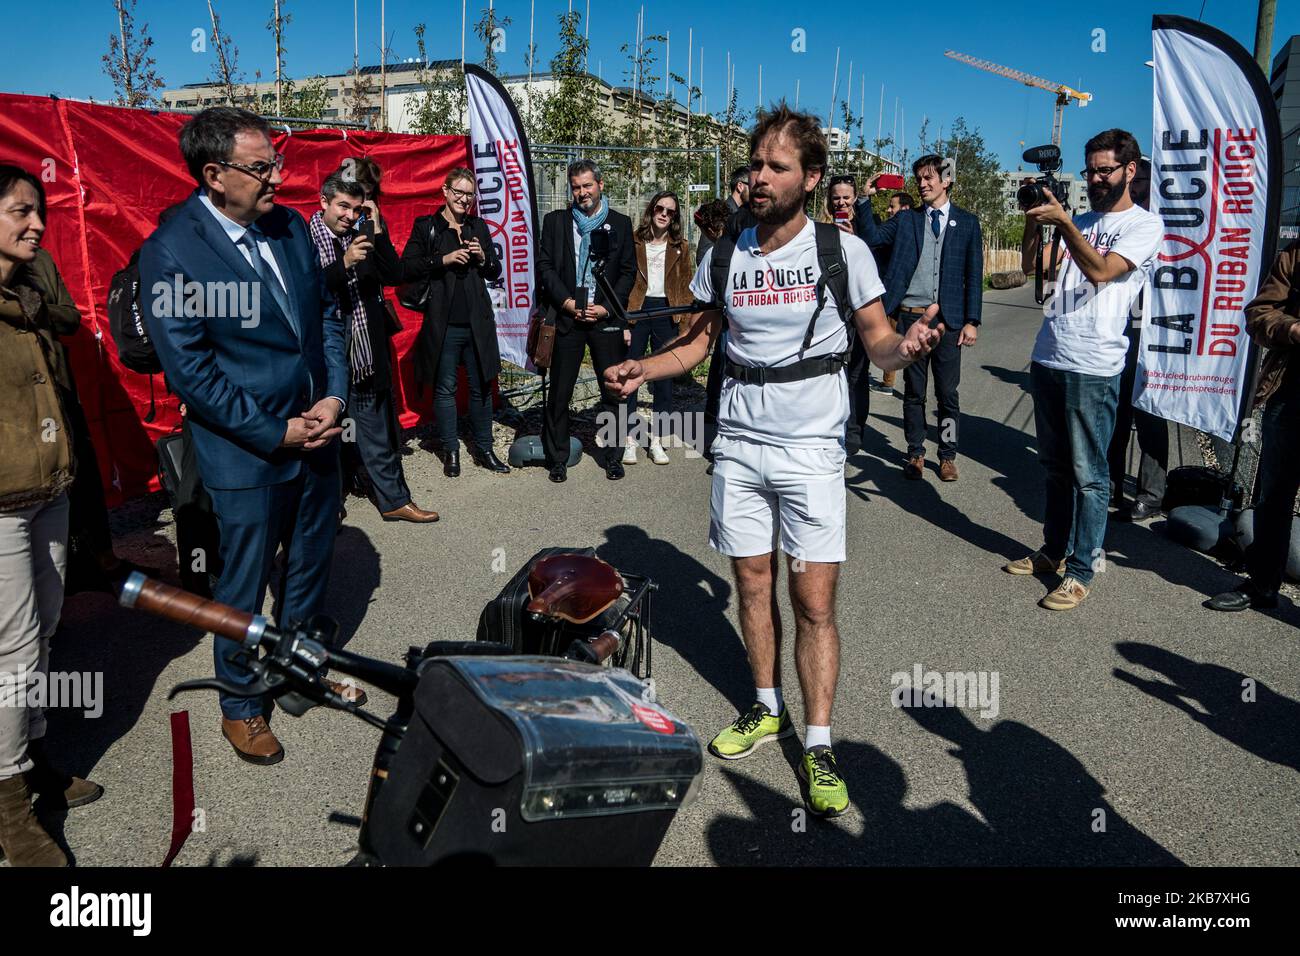 Jeremy Chalon arrives after 1600km by bike as part of the Red Ribbon in Lyon, France, on October 8, 2019. The Red Ribbon Loop is a national AIDS awareness and prevention operation that aims to mobilize elected officials and citizens on global health issues. (Photo by Nicolas Liponne/NurPhoto) Stock Photo